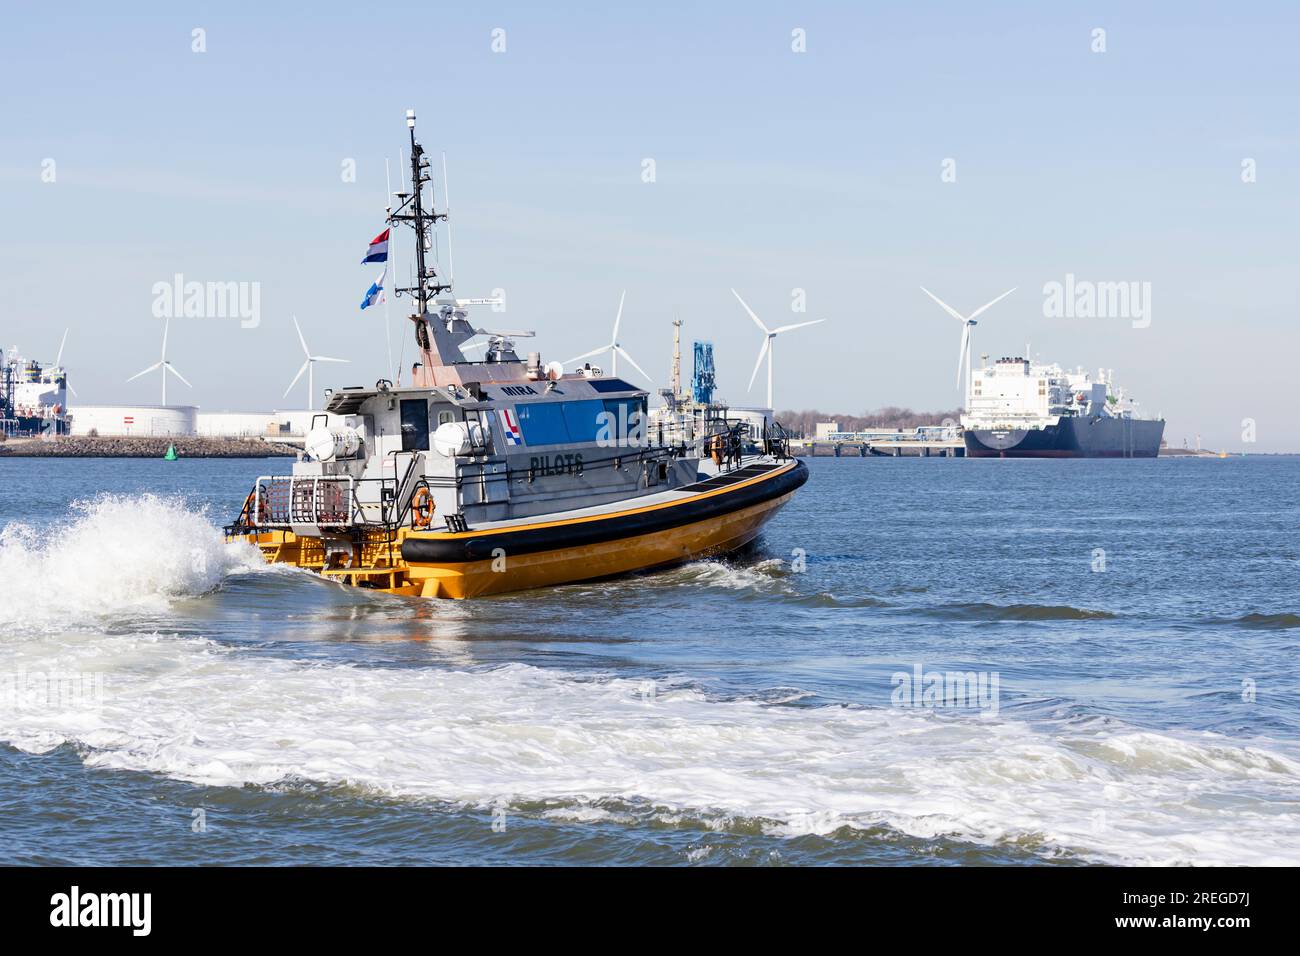 rotterdam, the Netherlands - 2022-02-26: A small vessel of pilot service in the port of Rotterdam at high speed Stock Photo